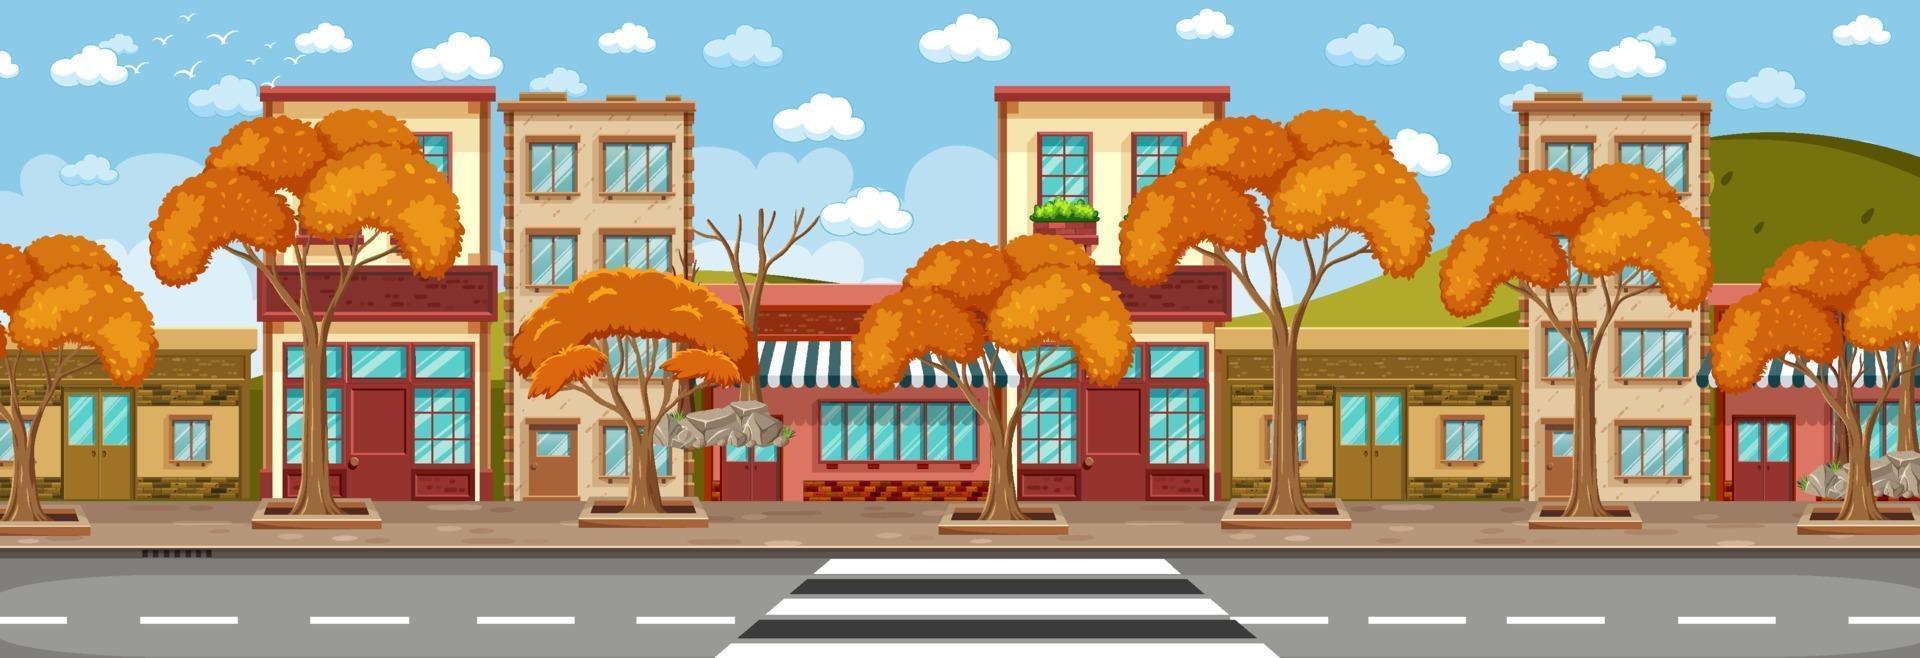 Many store buildings along the street horizontal scene at day time vector